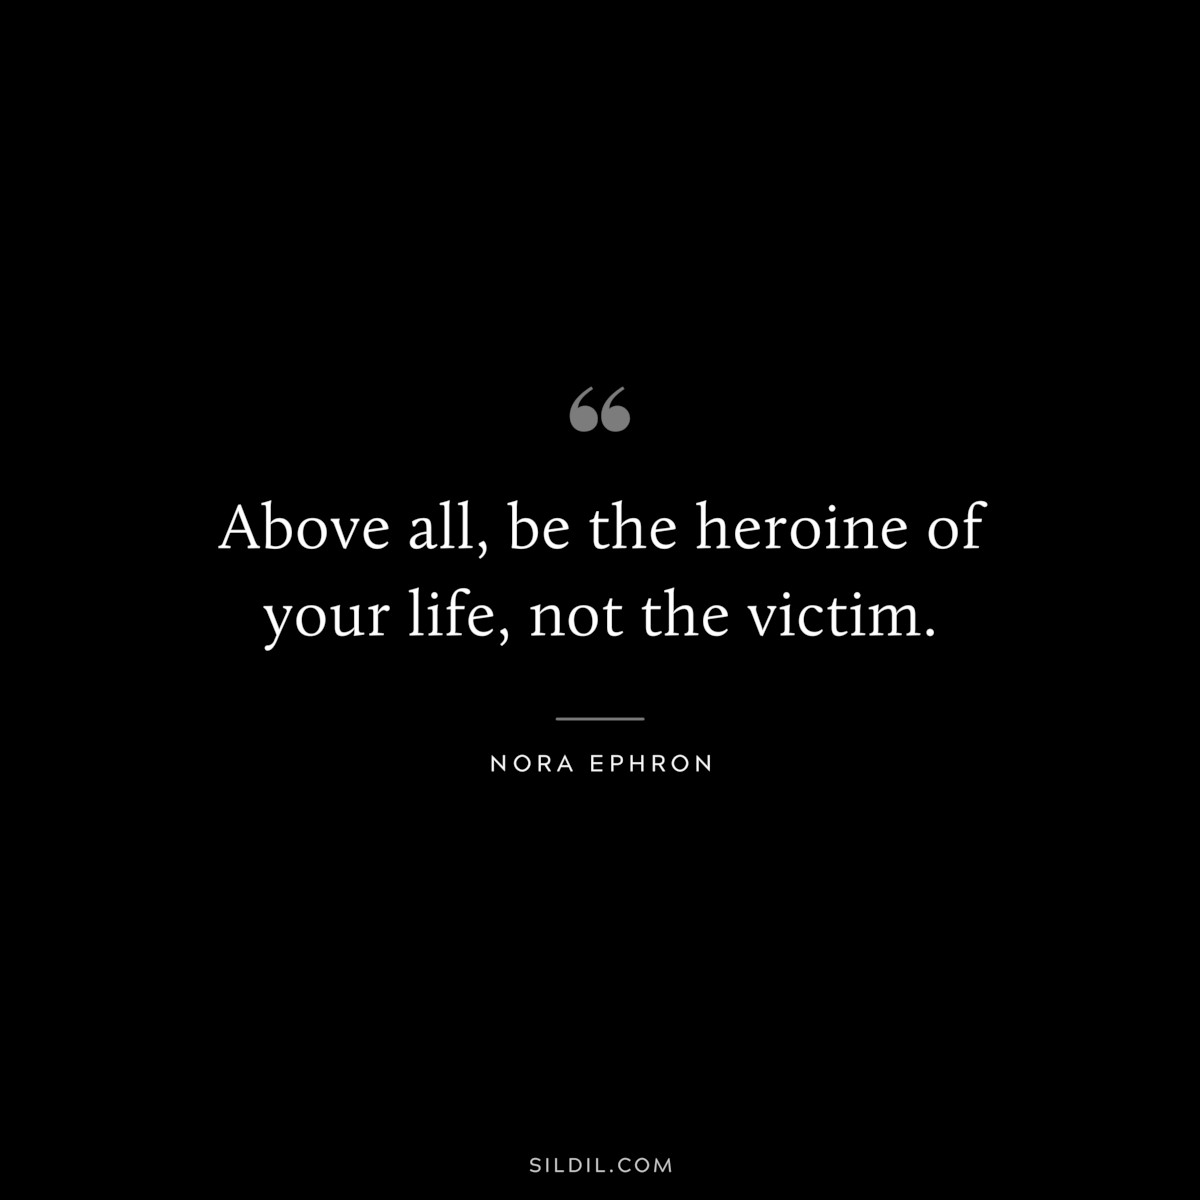 Above all, be the heroine of your life, not the victim. ― Nora Ephron